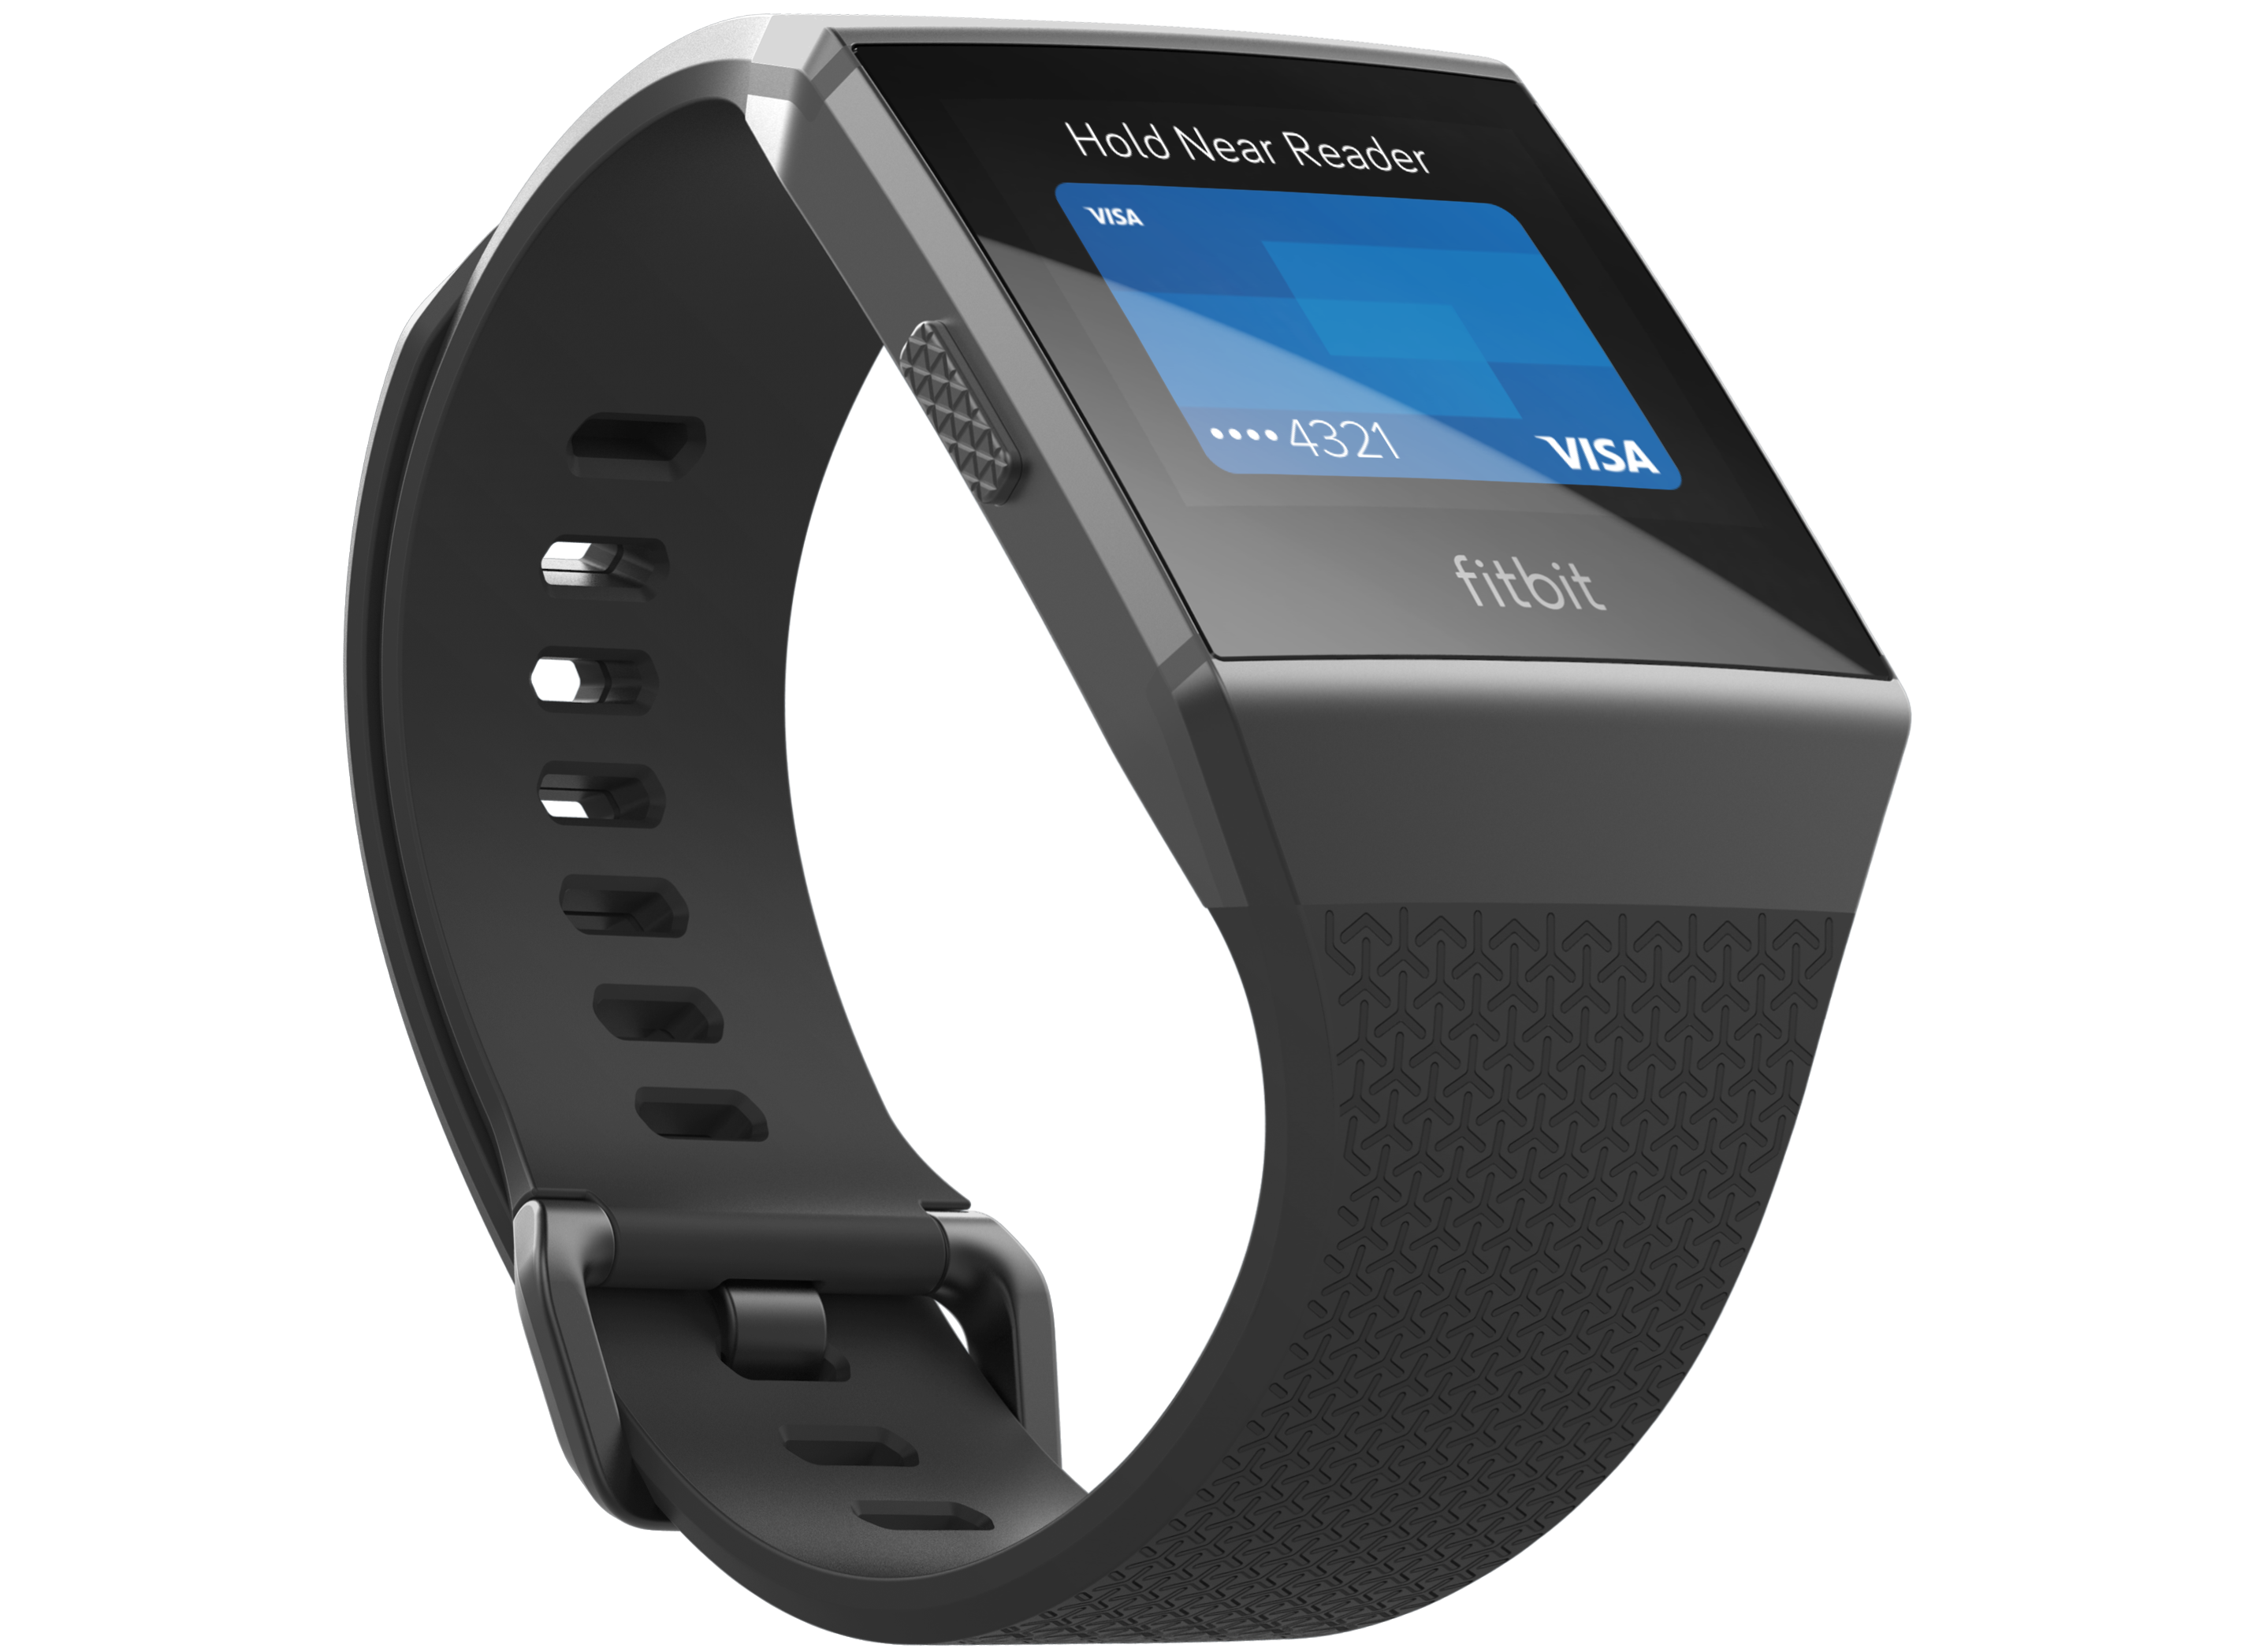 Fitbit Charge Fitness Band Sp